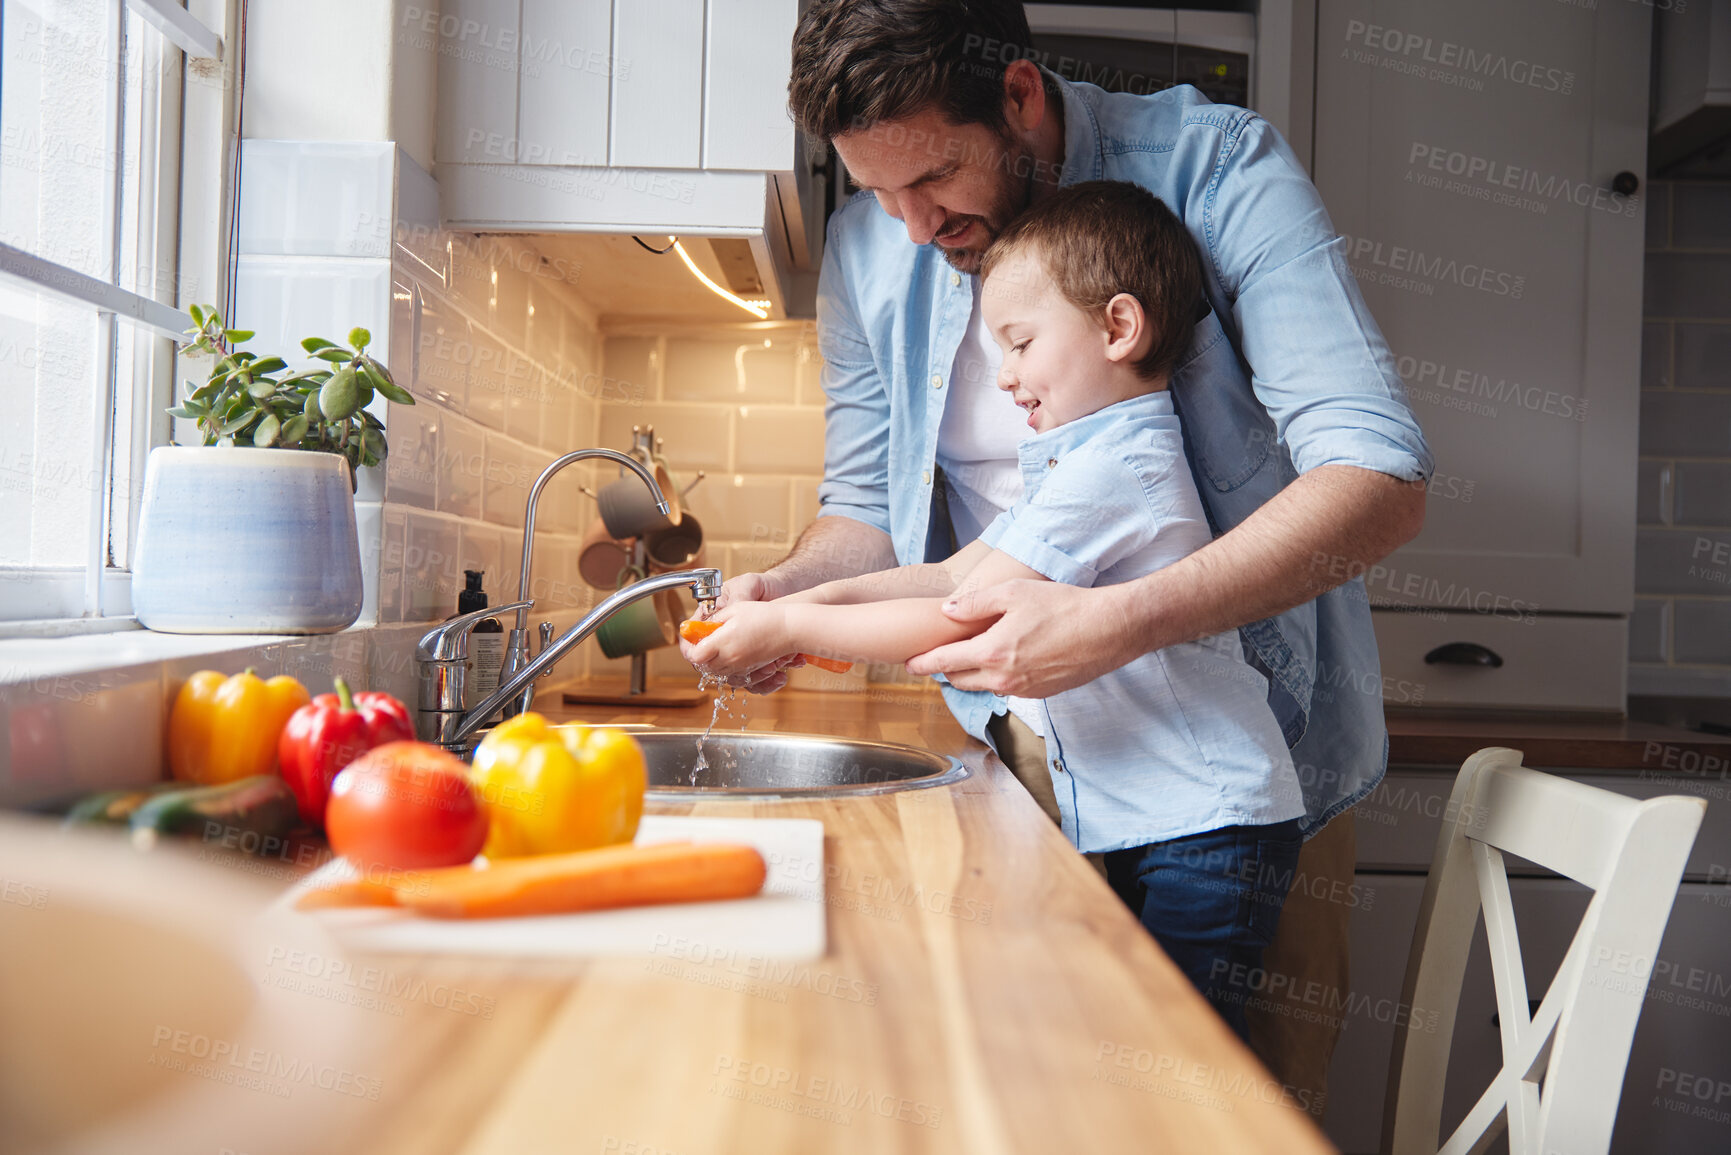 Buy stock photo Shot of a young boy and his father rinsing vegetables at home